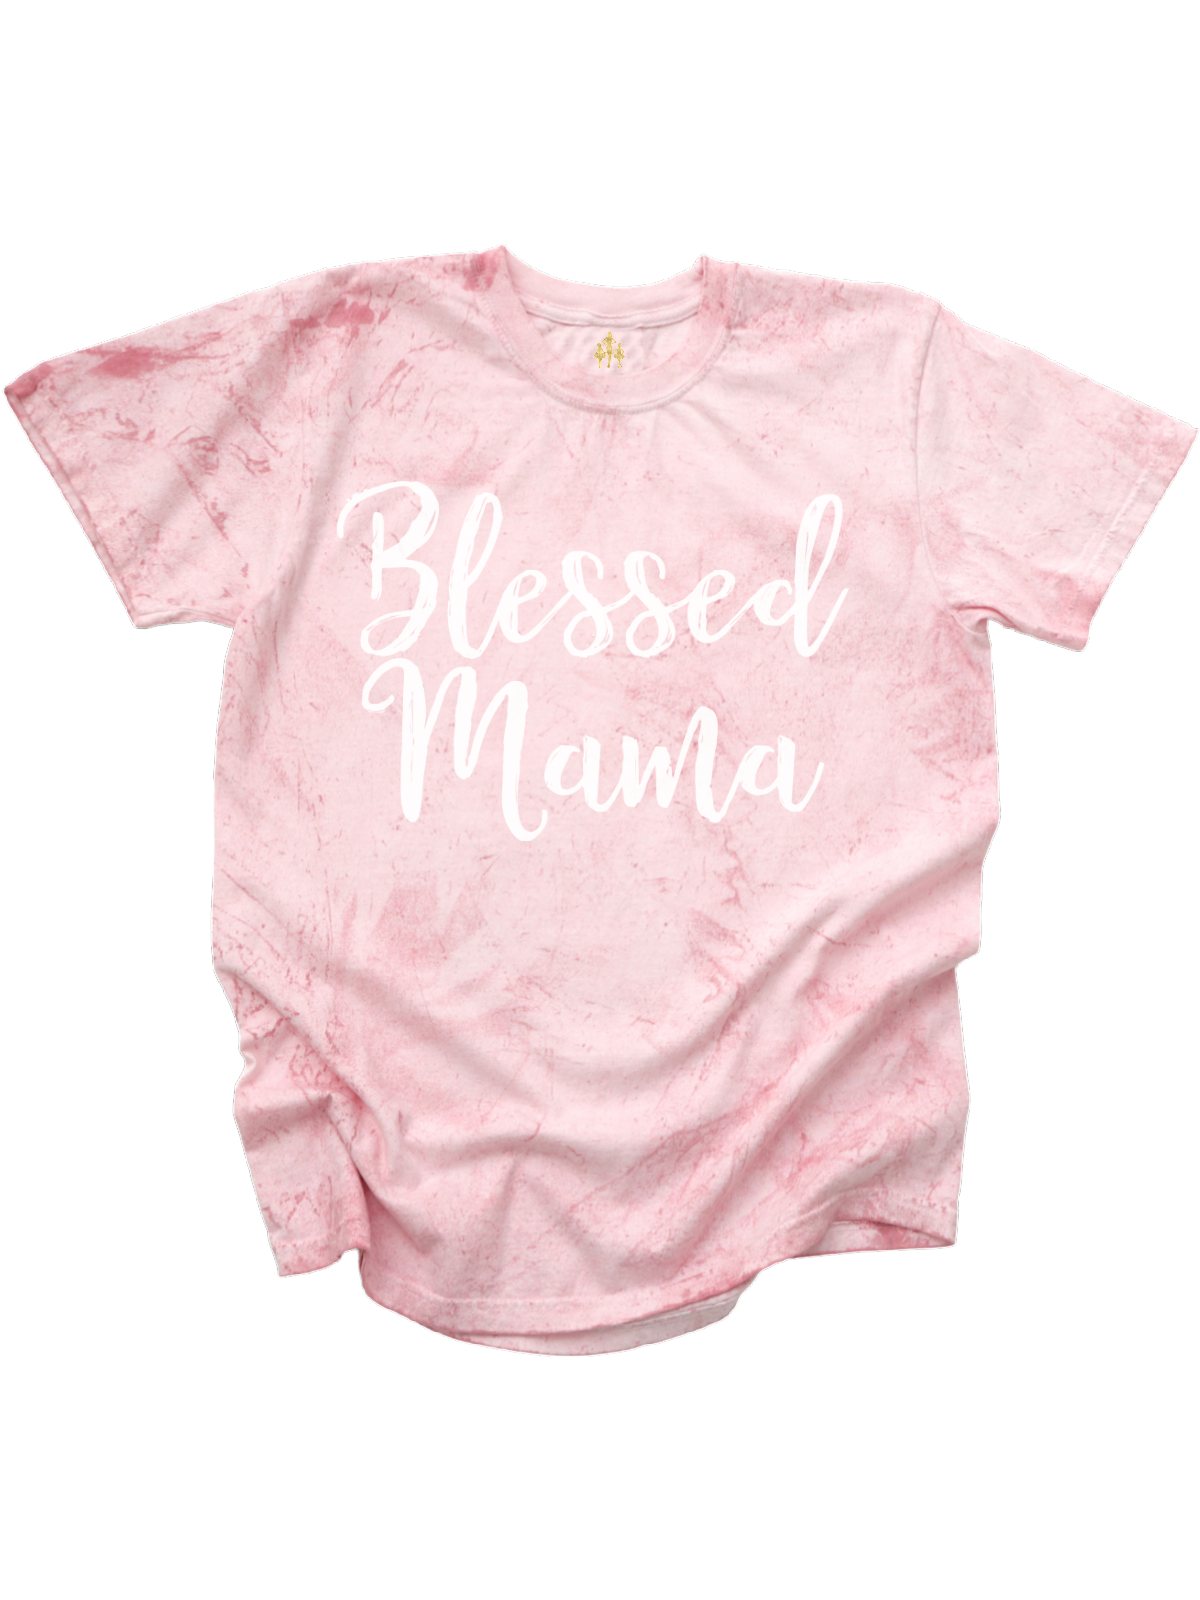 Pink Blessed Mama Tie Dye Shirt